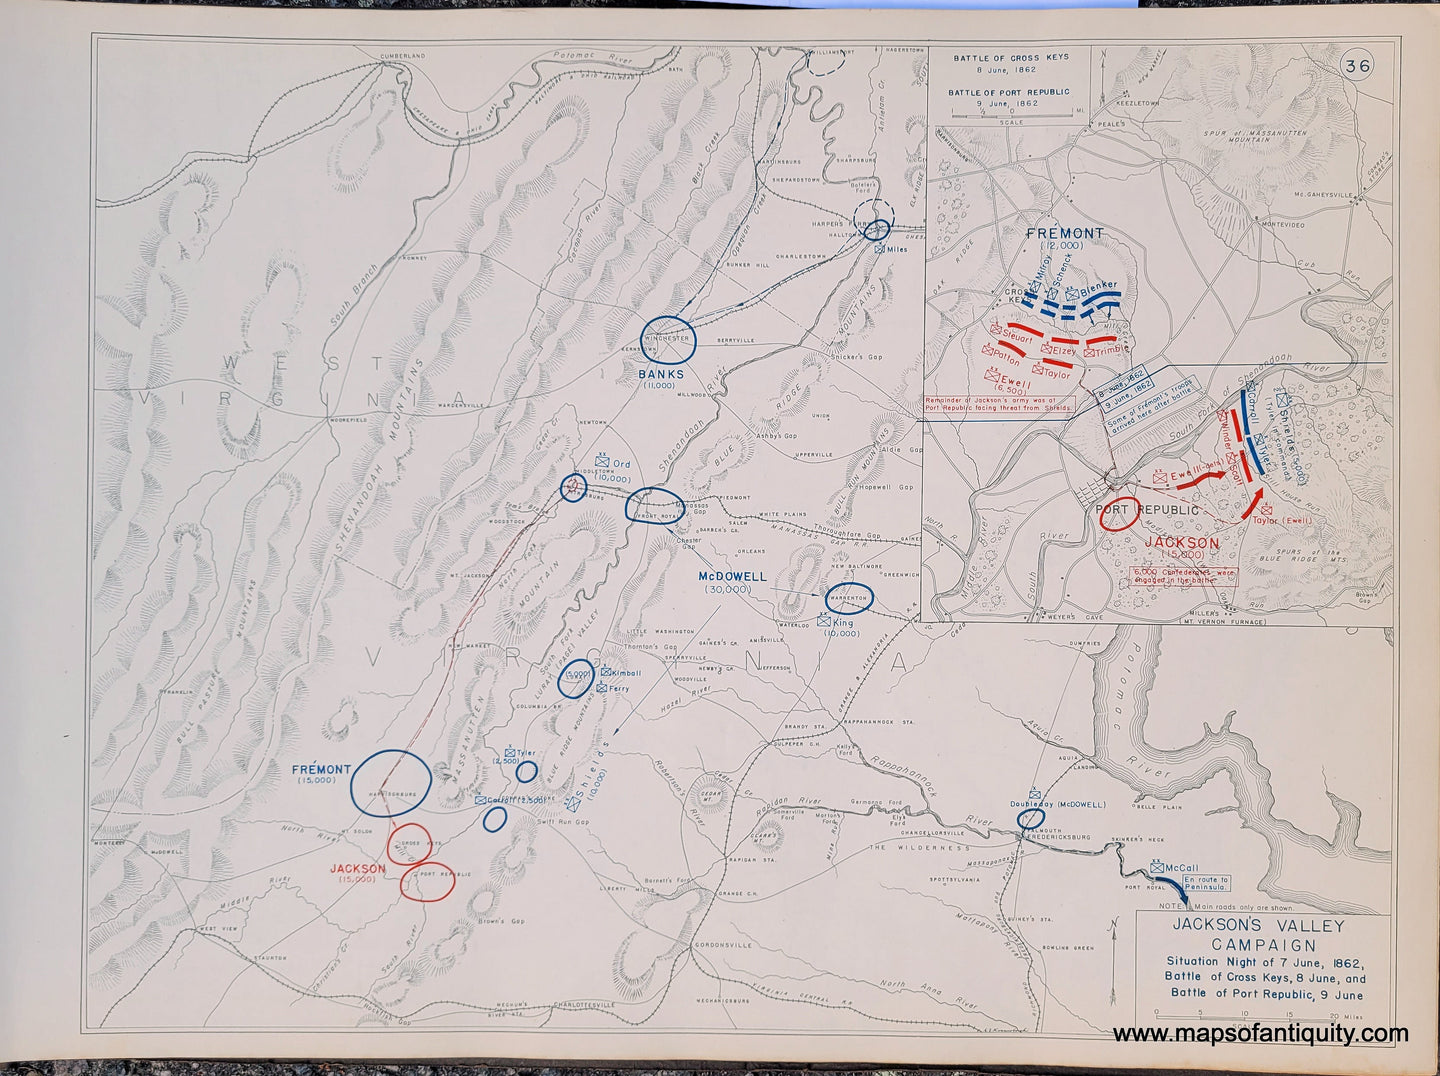 Genuine-Antique-Map-Jackson's-Valley-Campaign-Situation-Night-of-7-June-1862-Battle-of-Cross-Keys-8-June-and-Battle-of-Port-Republic-9-June-1948-Matthew-Forney-Steele-Dept-of-Military-Art-and-Engineering-US-Military-Academy-West-Point-Maps-Of-Antiquity